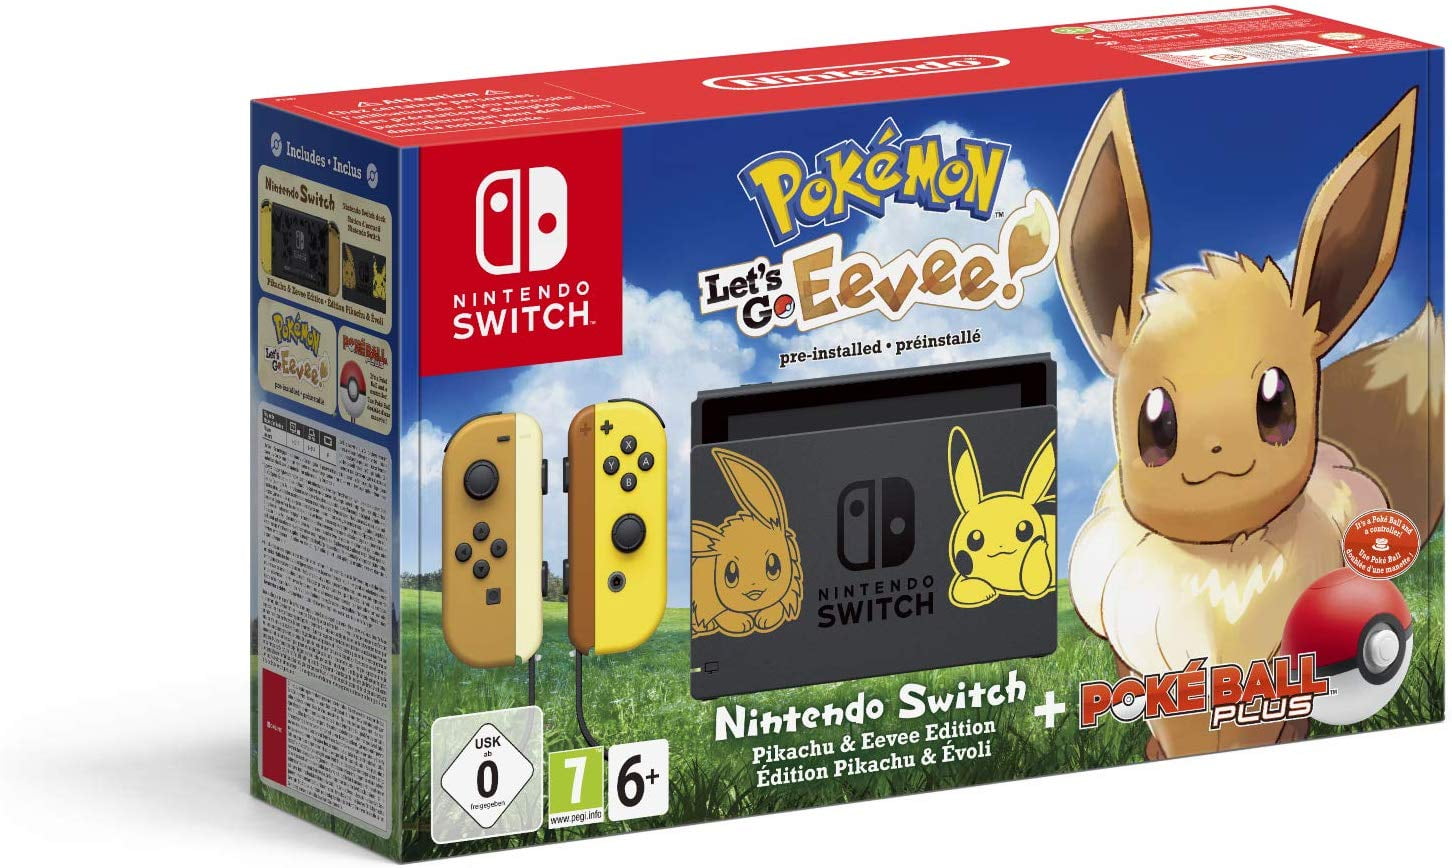 Wear out Applicant overthrow NSW NINTENDO SWITCH PIKACHU & EEVEE EDITION WITH POKÉMON: LET'S GO, EEVEE!  + POKÉ BALL PLUS [LIMITED EDITION] (US) - Walmart.com